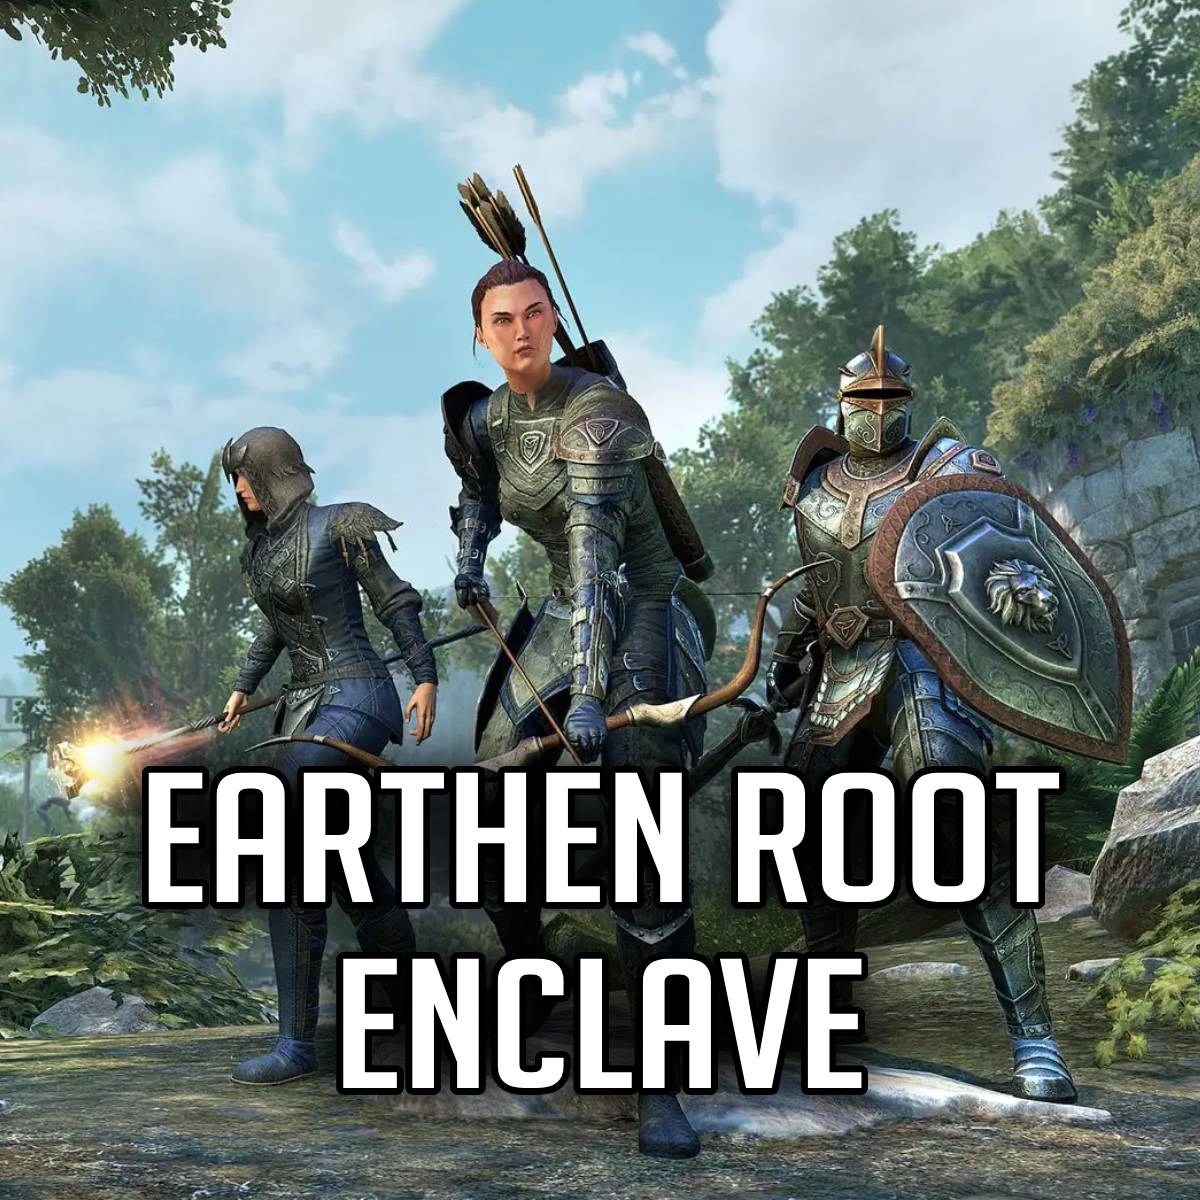 Earthen Root Enclave Guide Dungeon ESO